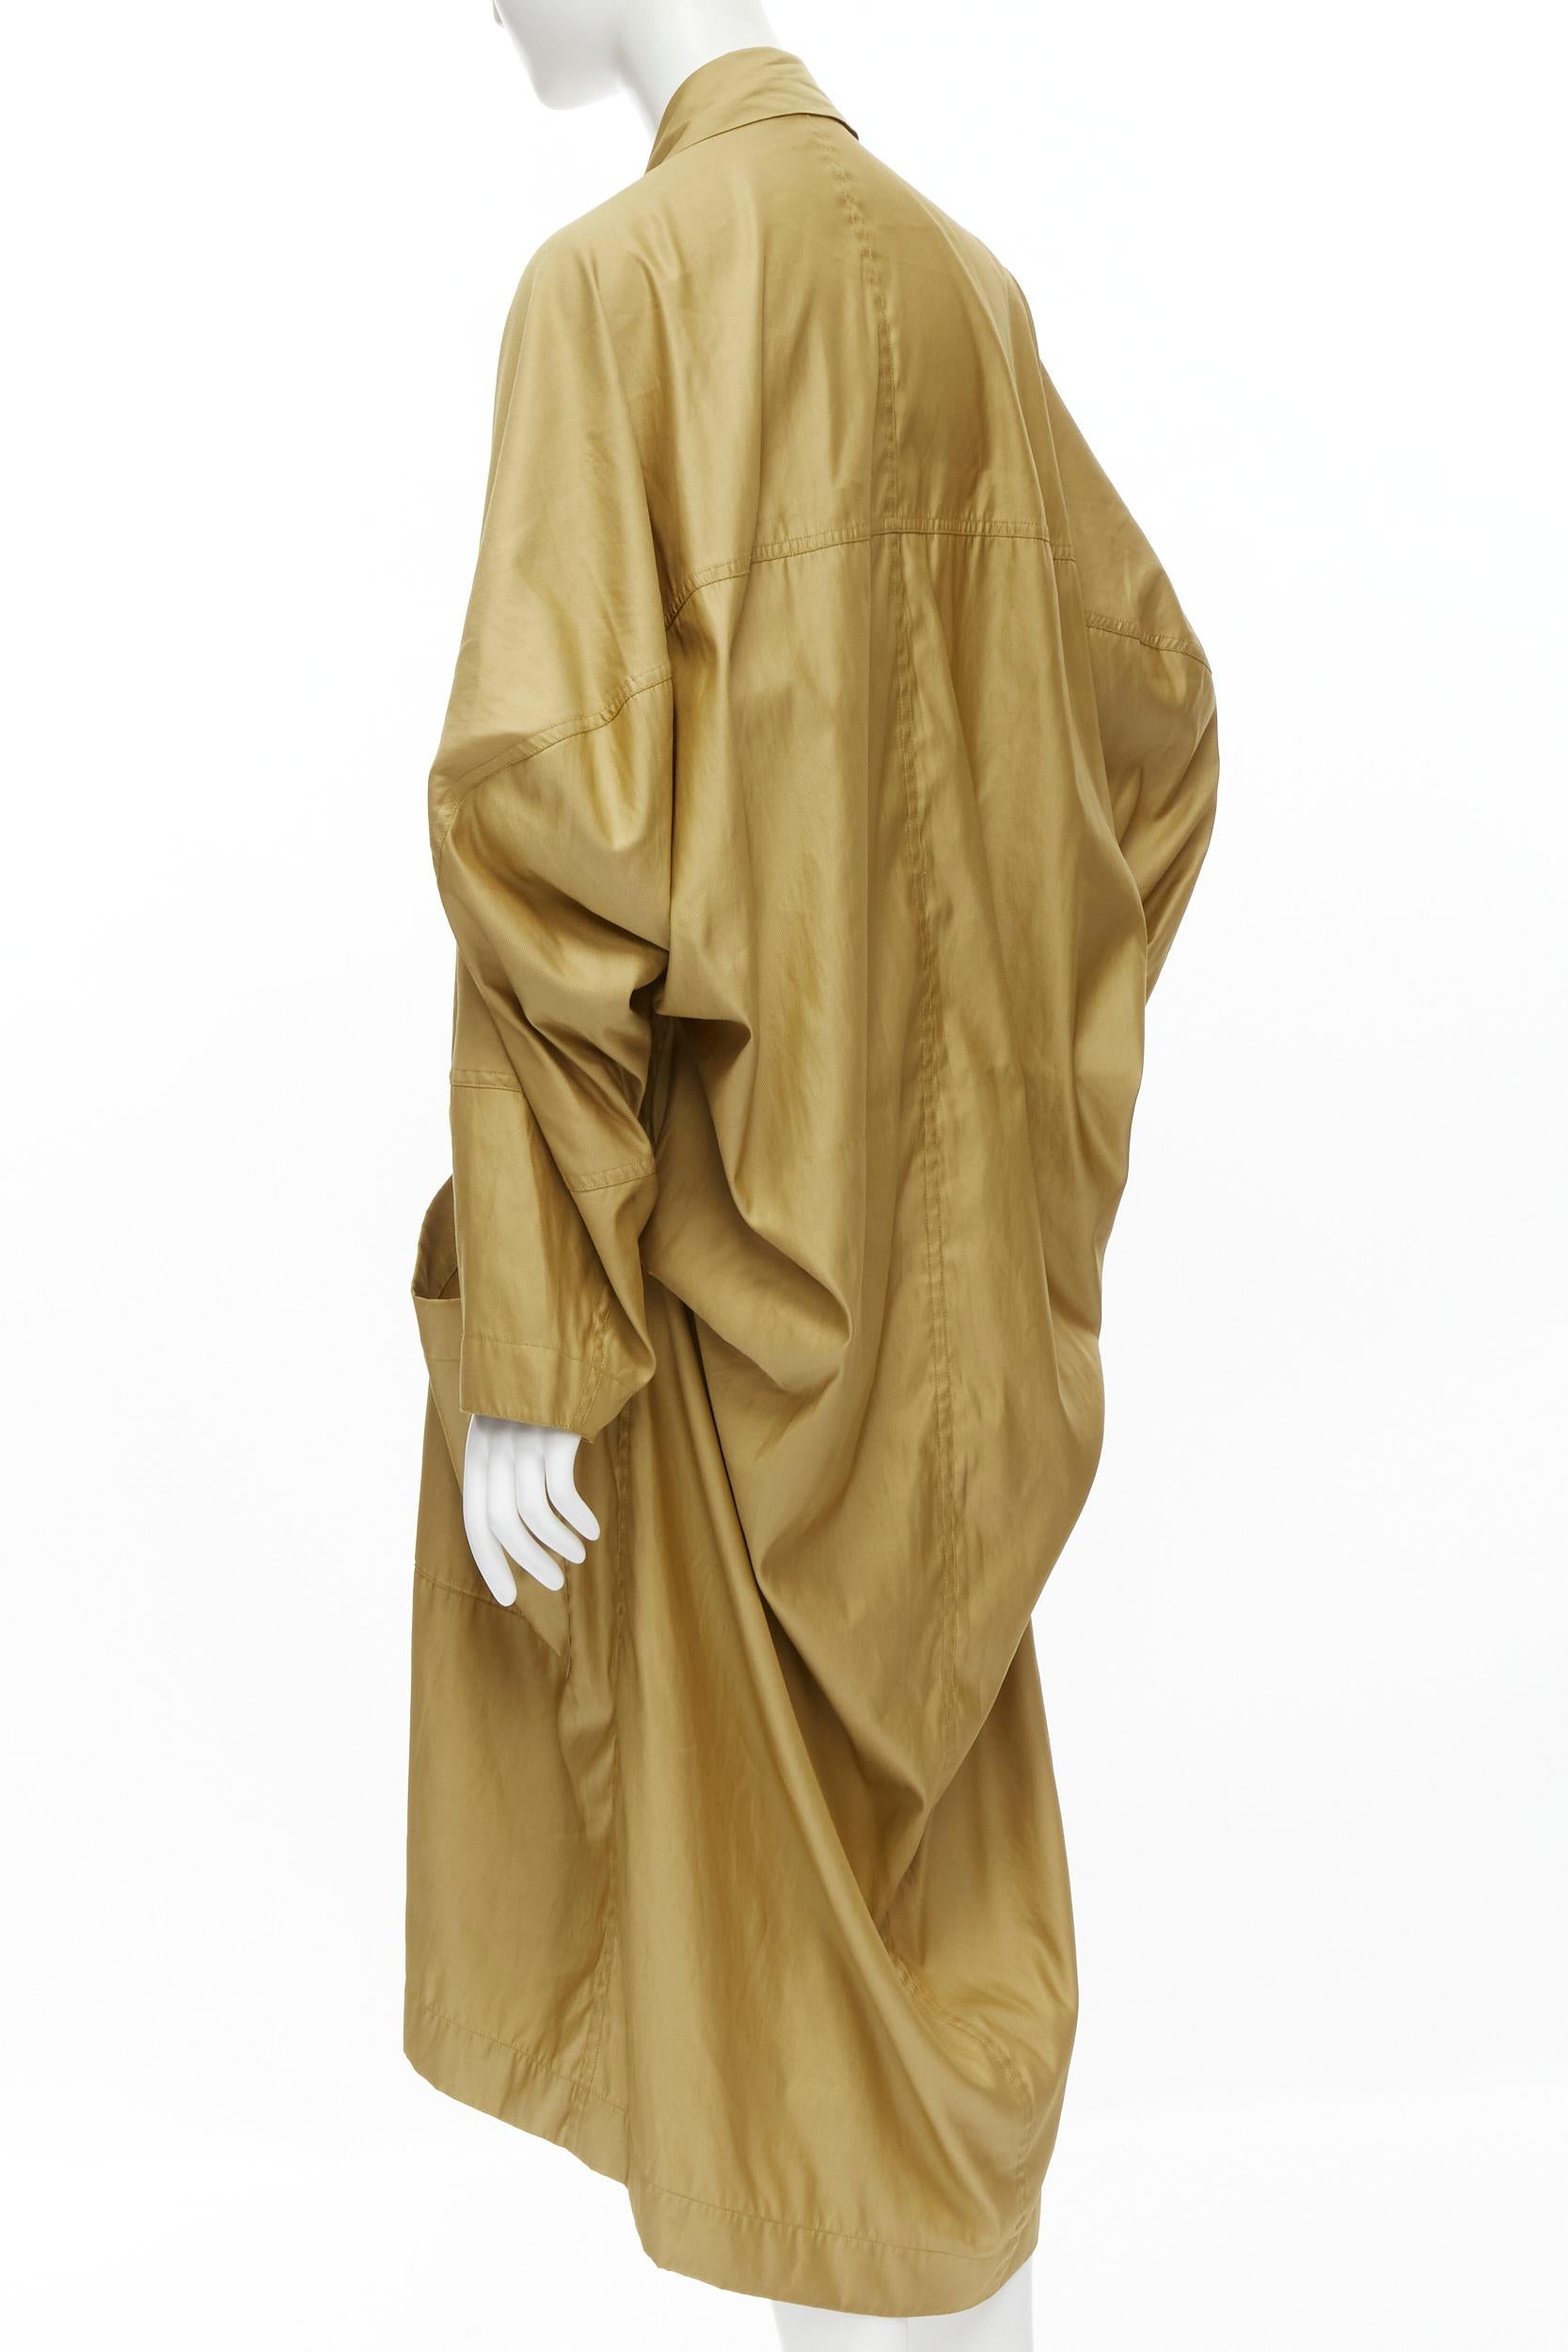 ISSEY MIYAKE Vintage 1980s gold beige parachute draped back trench coat M 
Reference: CRTI/A00552 
Brand: Issey Miyake 
Collection: 1980's 
Color: Beige 
Pattern: Solid 
Closure: Button 
Extra Detail: Oversized fit. Draped parachute back. Double